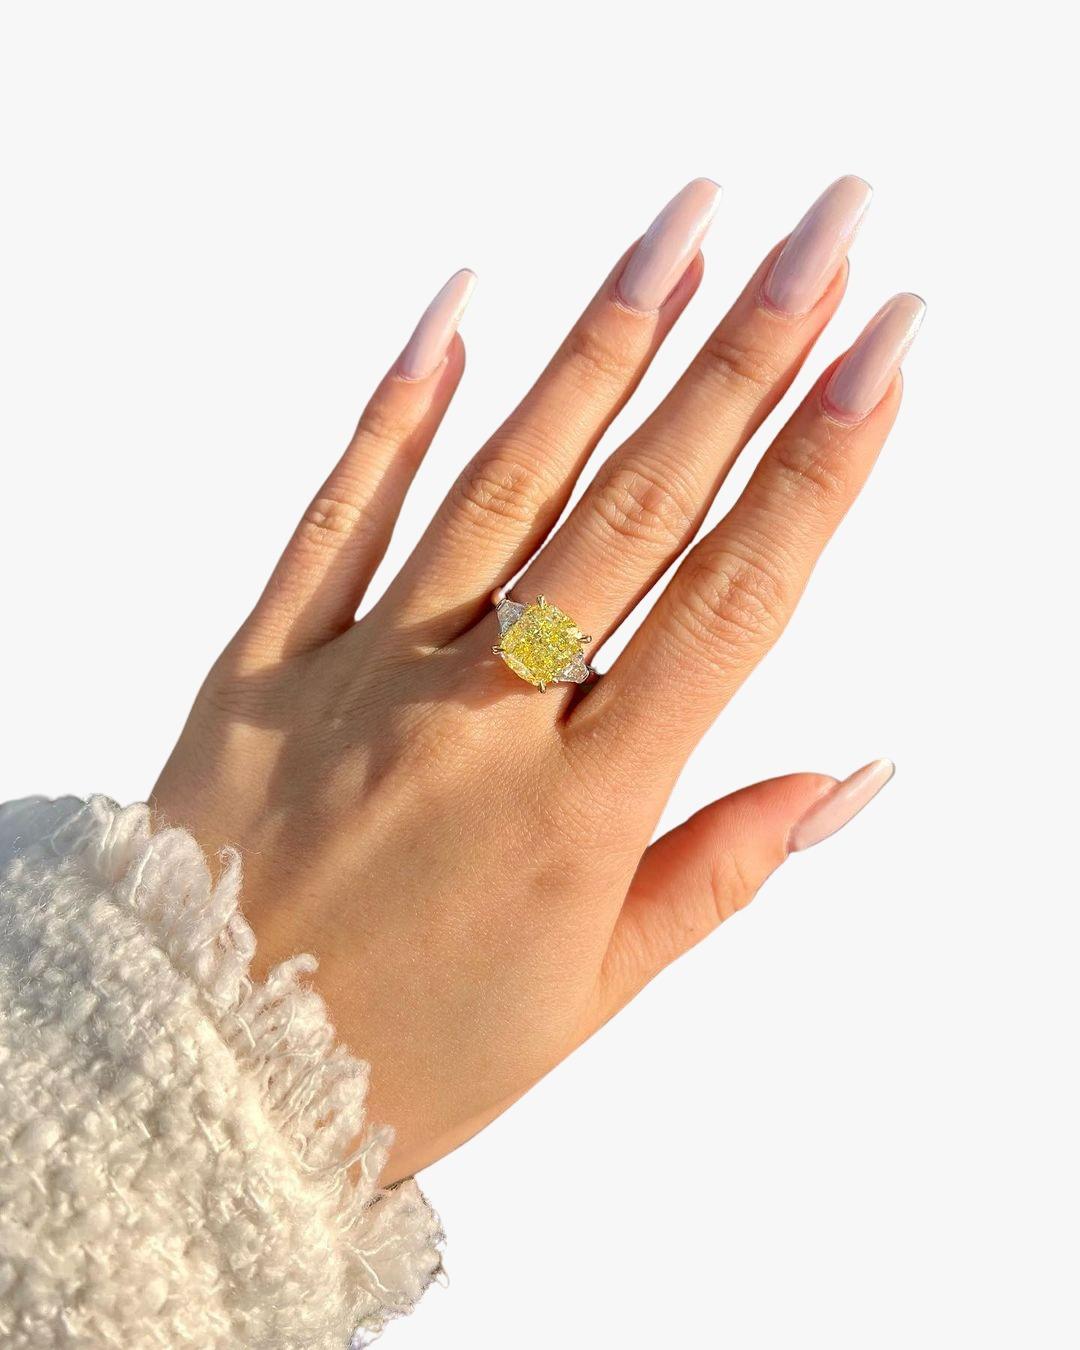 A STUNNING yellow diamond ring!

GIA certified 4.30 carat Radiant cut Fancy Yellow, FLAWLESS Clarity center diamond.

.65 carats of white side diamonds.

Custom platinum and 18k yellow gold mounting.

Size 6, this ring can easily be resized.